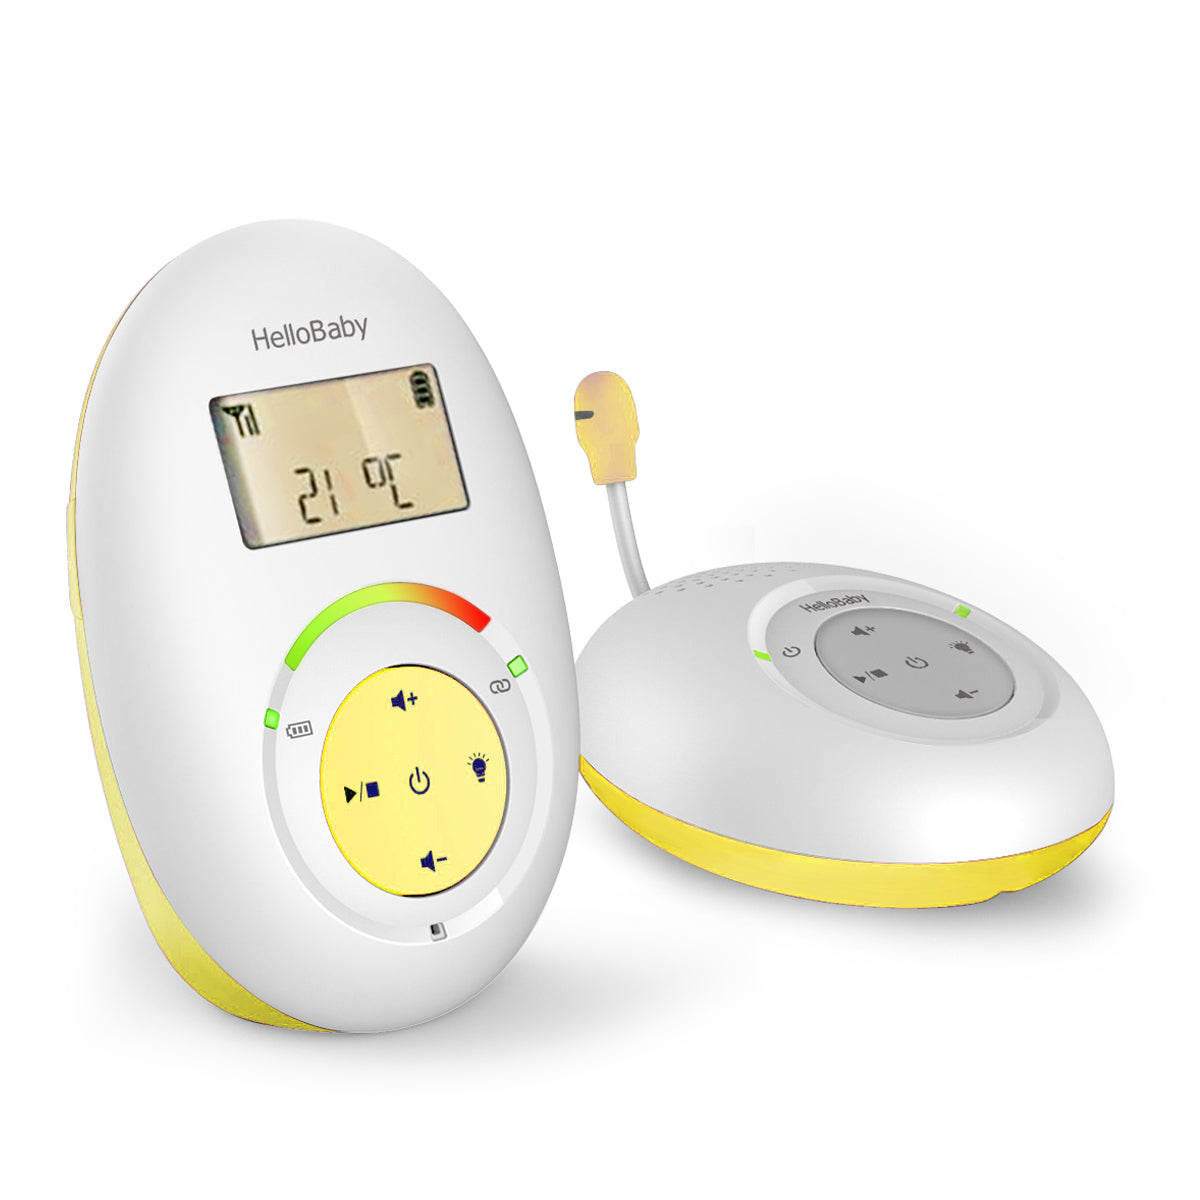 hellobaby best baby monitor - HB180-Two-Way Audio Baby Monitor with Temprature Sensor, Sound Alert, Lullabies & Night Light  